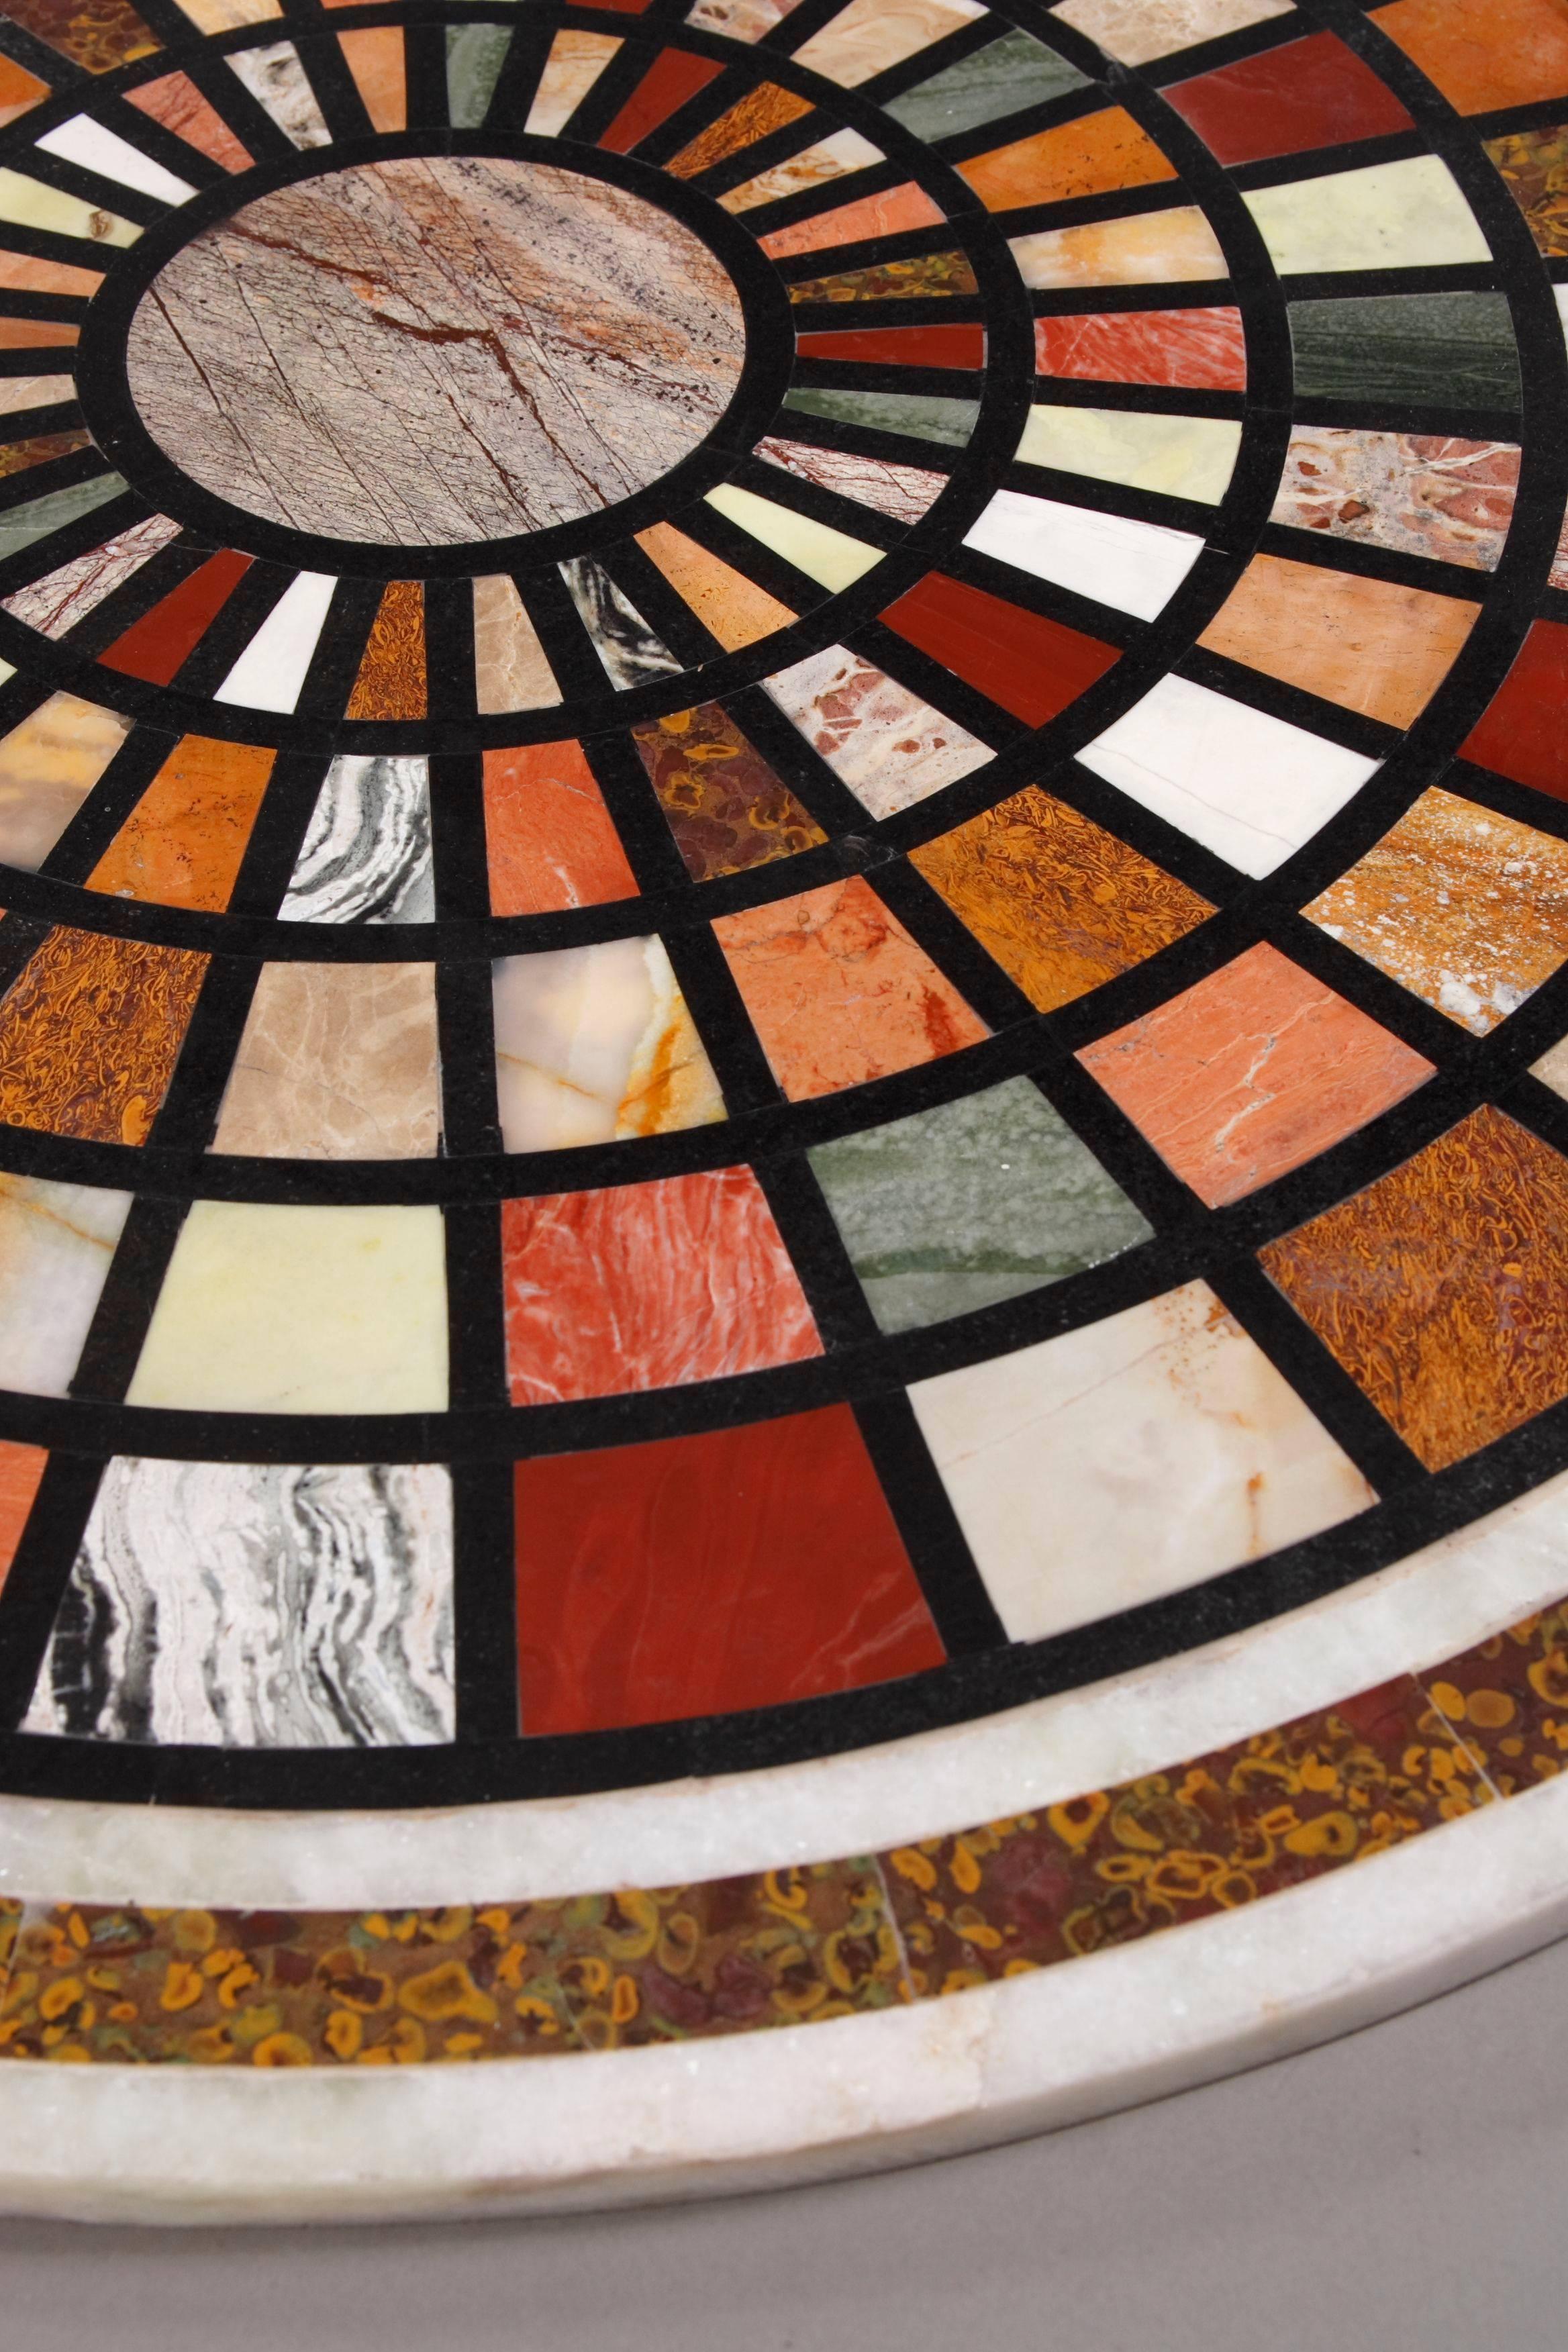 Pietra dura table platter in Classicist style.
Colored inlaid mosaic pattern in facet shape with in itself tapered optic towards the middle. Inlaid with highly valuable semi precious stones such as Cornelian, Coral, Jasper, Lapis Lazuli and other